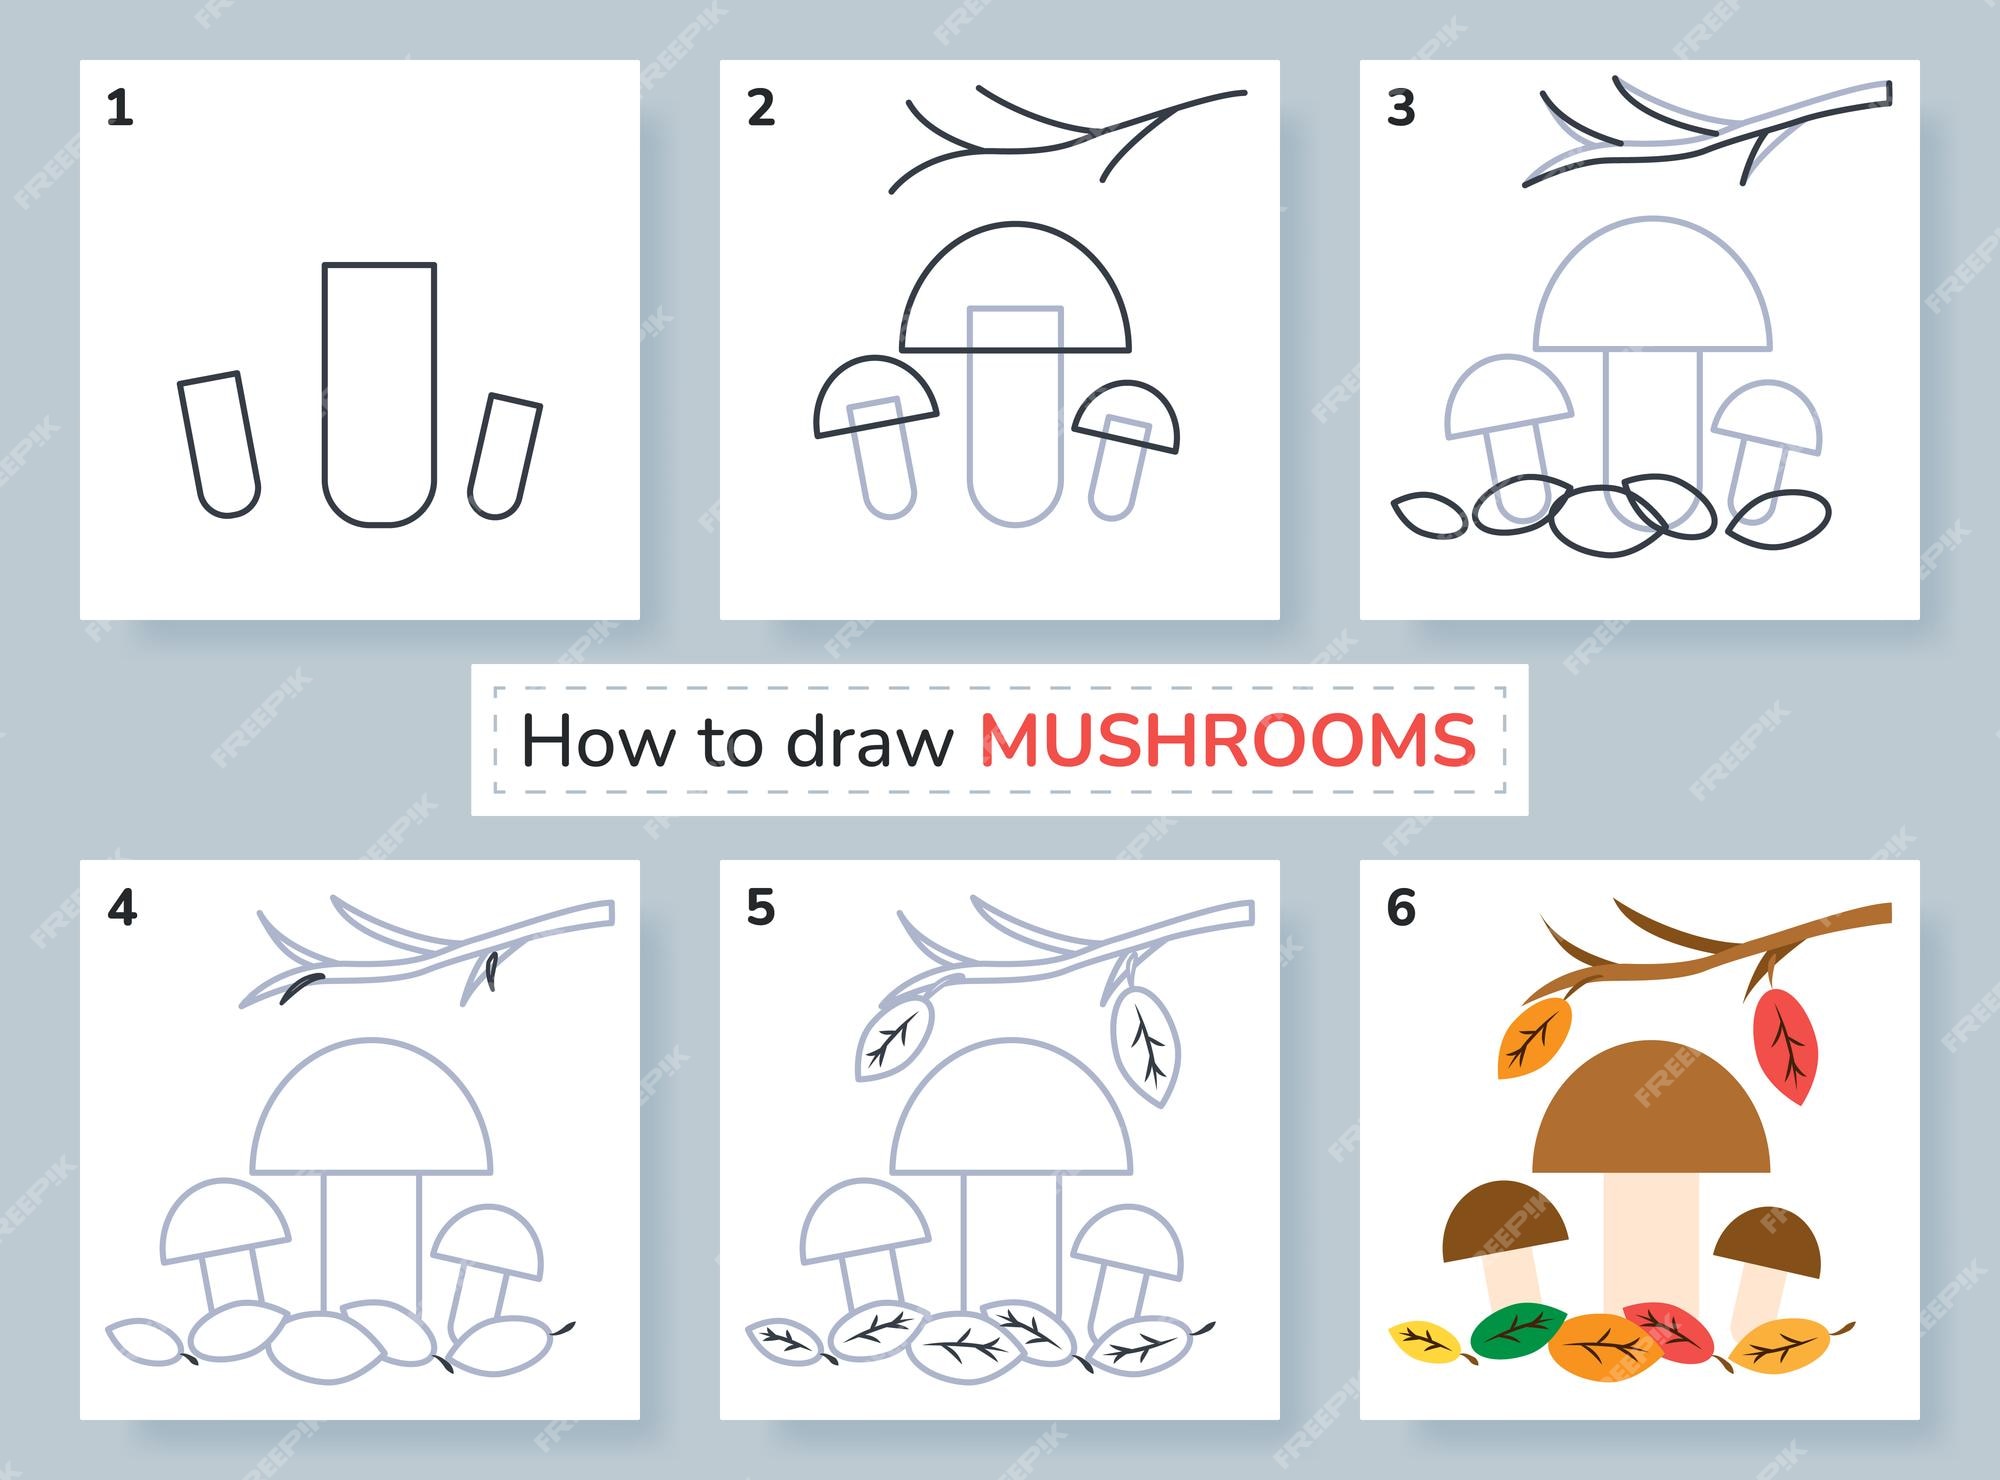 How to Draw a Mushroom  Easy Step by Step Tutorial - Art by Ro